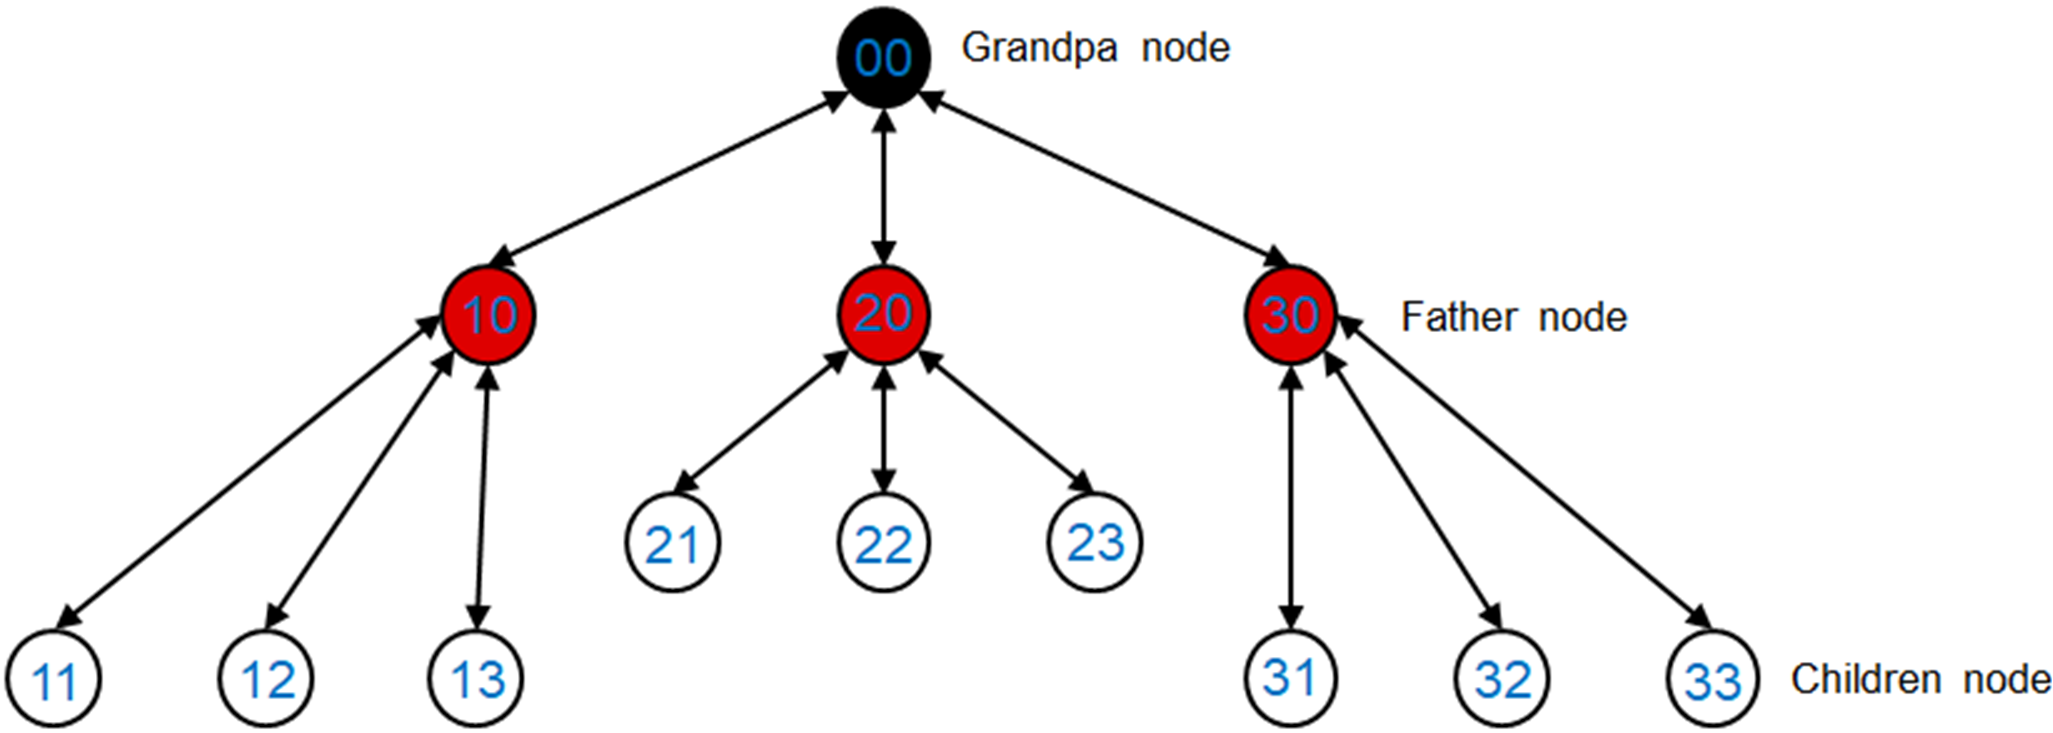 index-in-tree-structure-networks.png